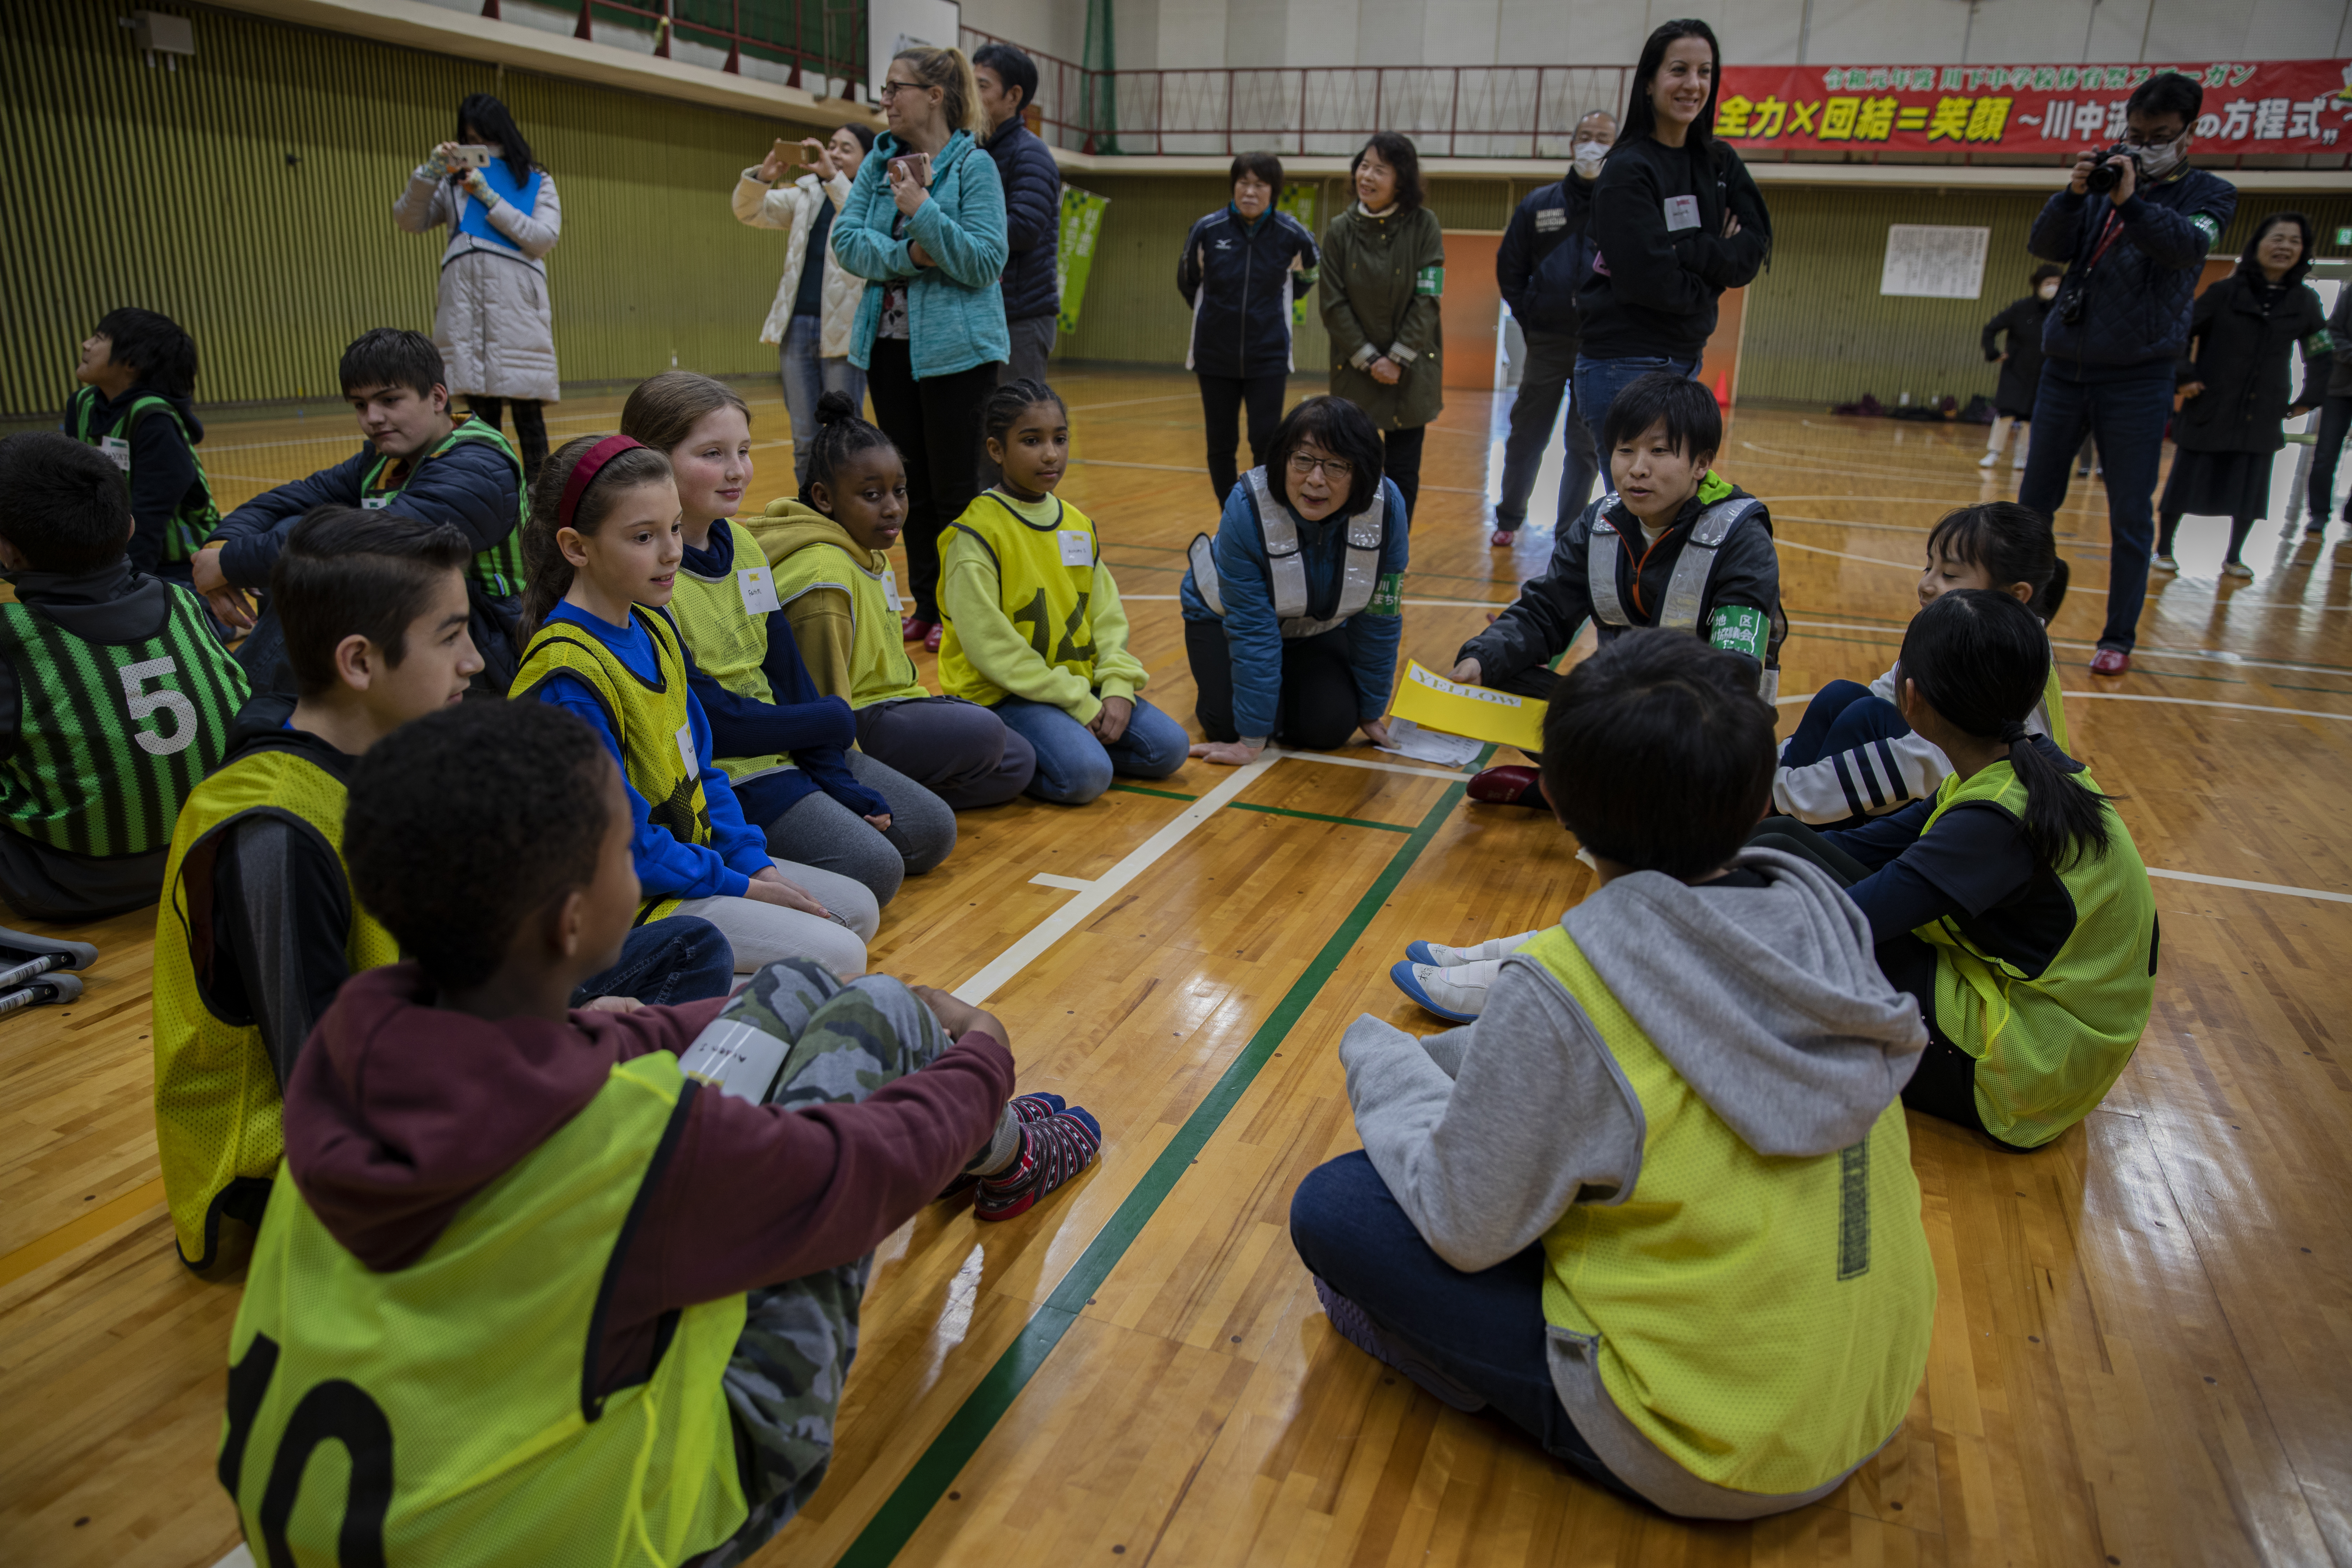 Students from Iwakuni Middle School and Kawashimo Junior High School play an interactive game during a cultural exchange event at Kawashimo Junior High School, Iwakuni City, Japan, Feb. 11, 2020. This annual event allows middle school students from two different cultures to interact with each other.The exchange provided an opportunity for children from the air station to have a friendly competition with local Japanese students. (U.S. Marine Corps photo by Lance Cpl. Triton Lai)